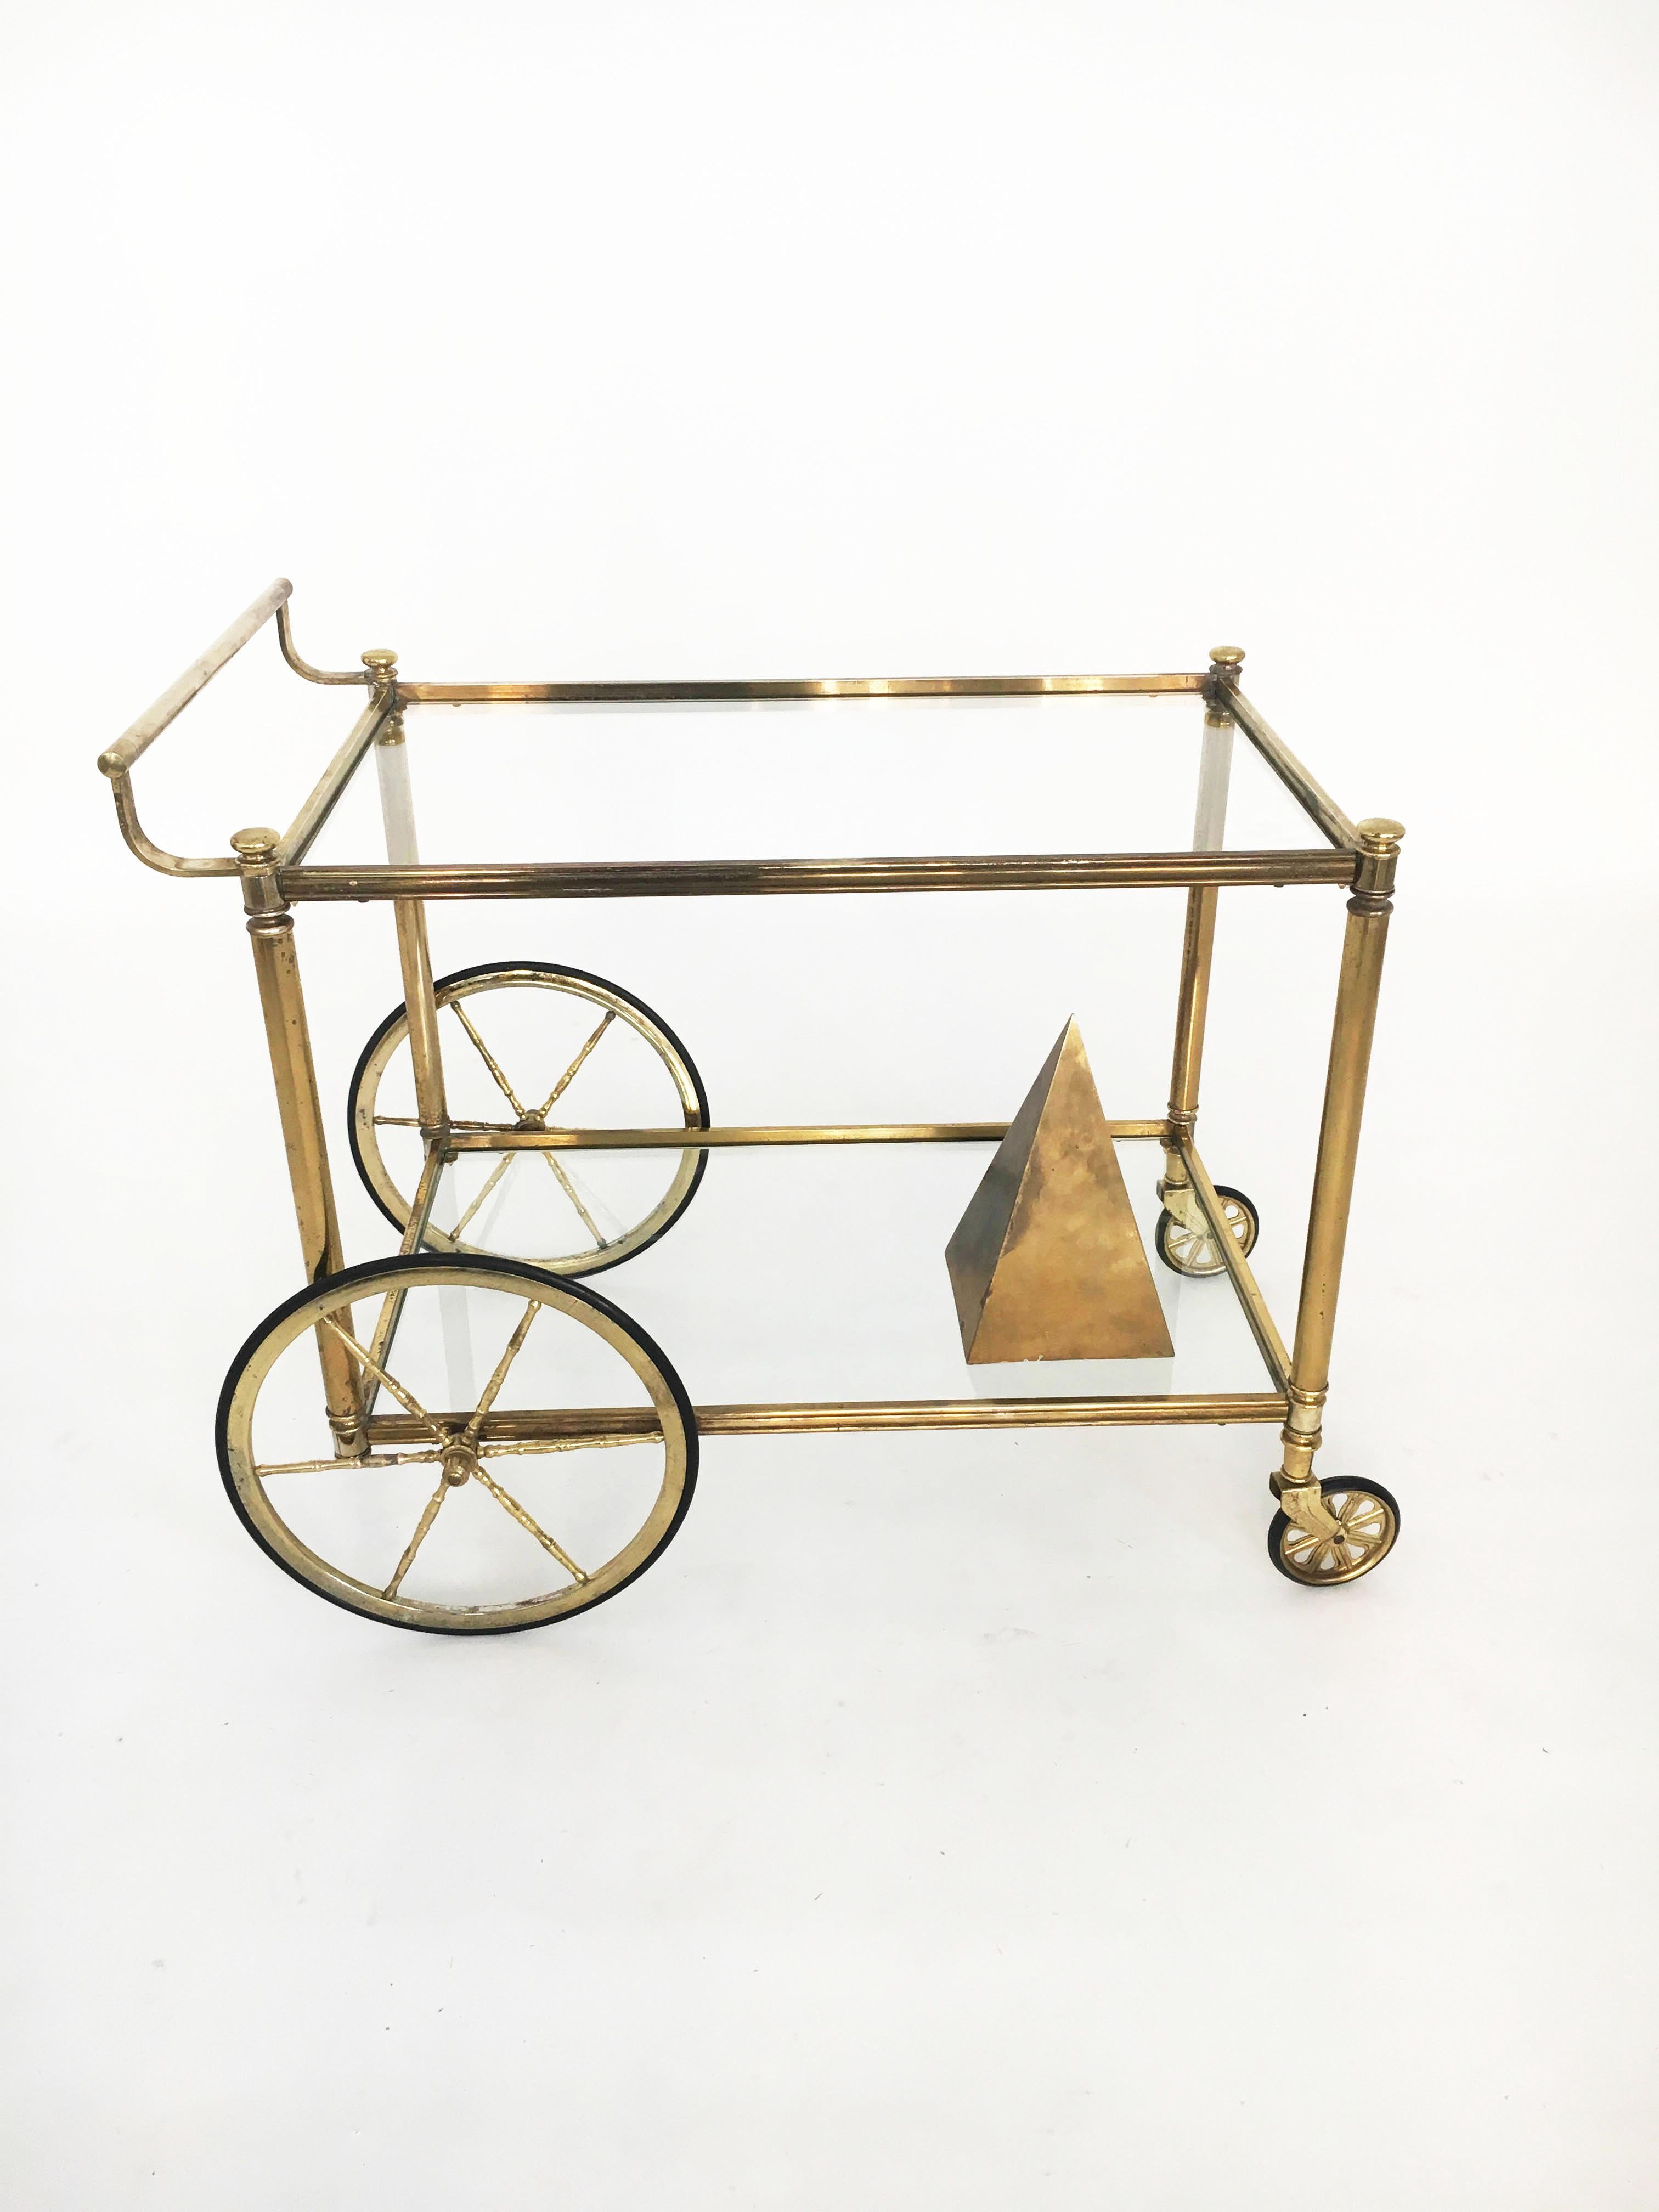 Late 20th Century Maison Jansen Style Bar Cart in Patinated Brass, France 1950s For Sale